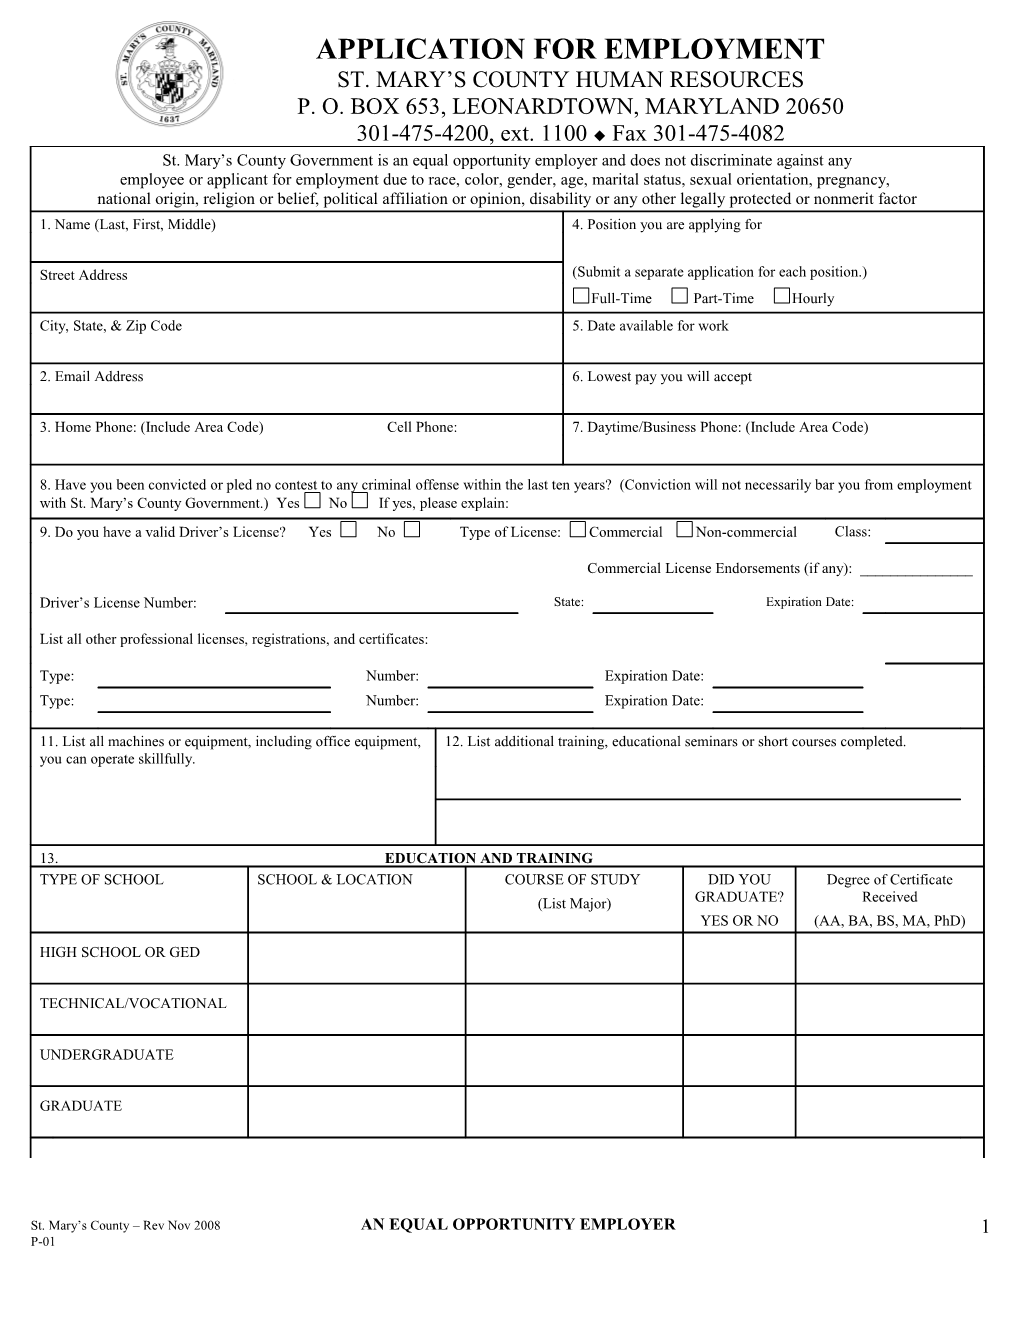 Application for Employment s172